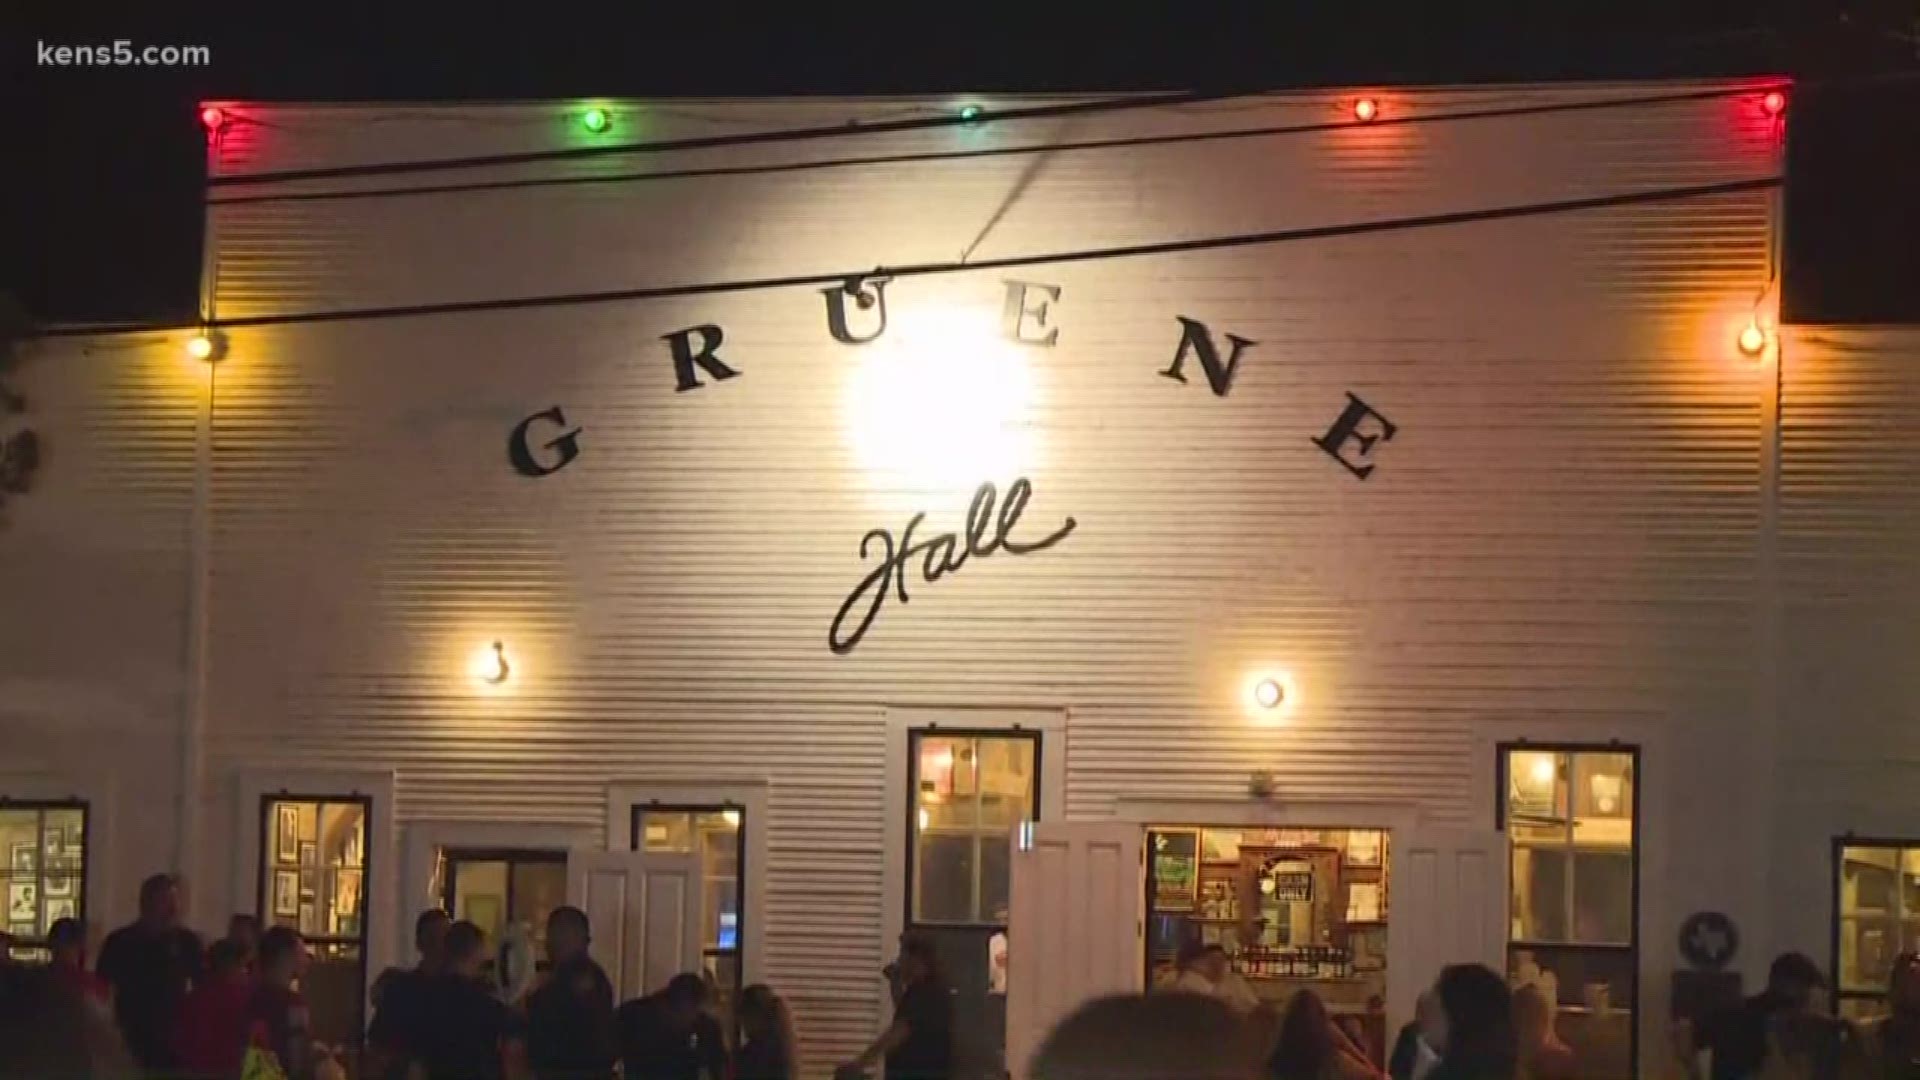 Country music superstar Garth Brooks rocked historic Gruene Hall as part of his dive-bar-across-America tour on Monday.